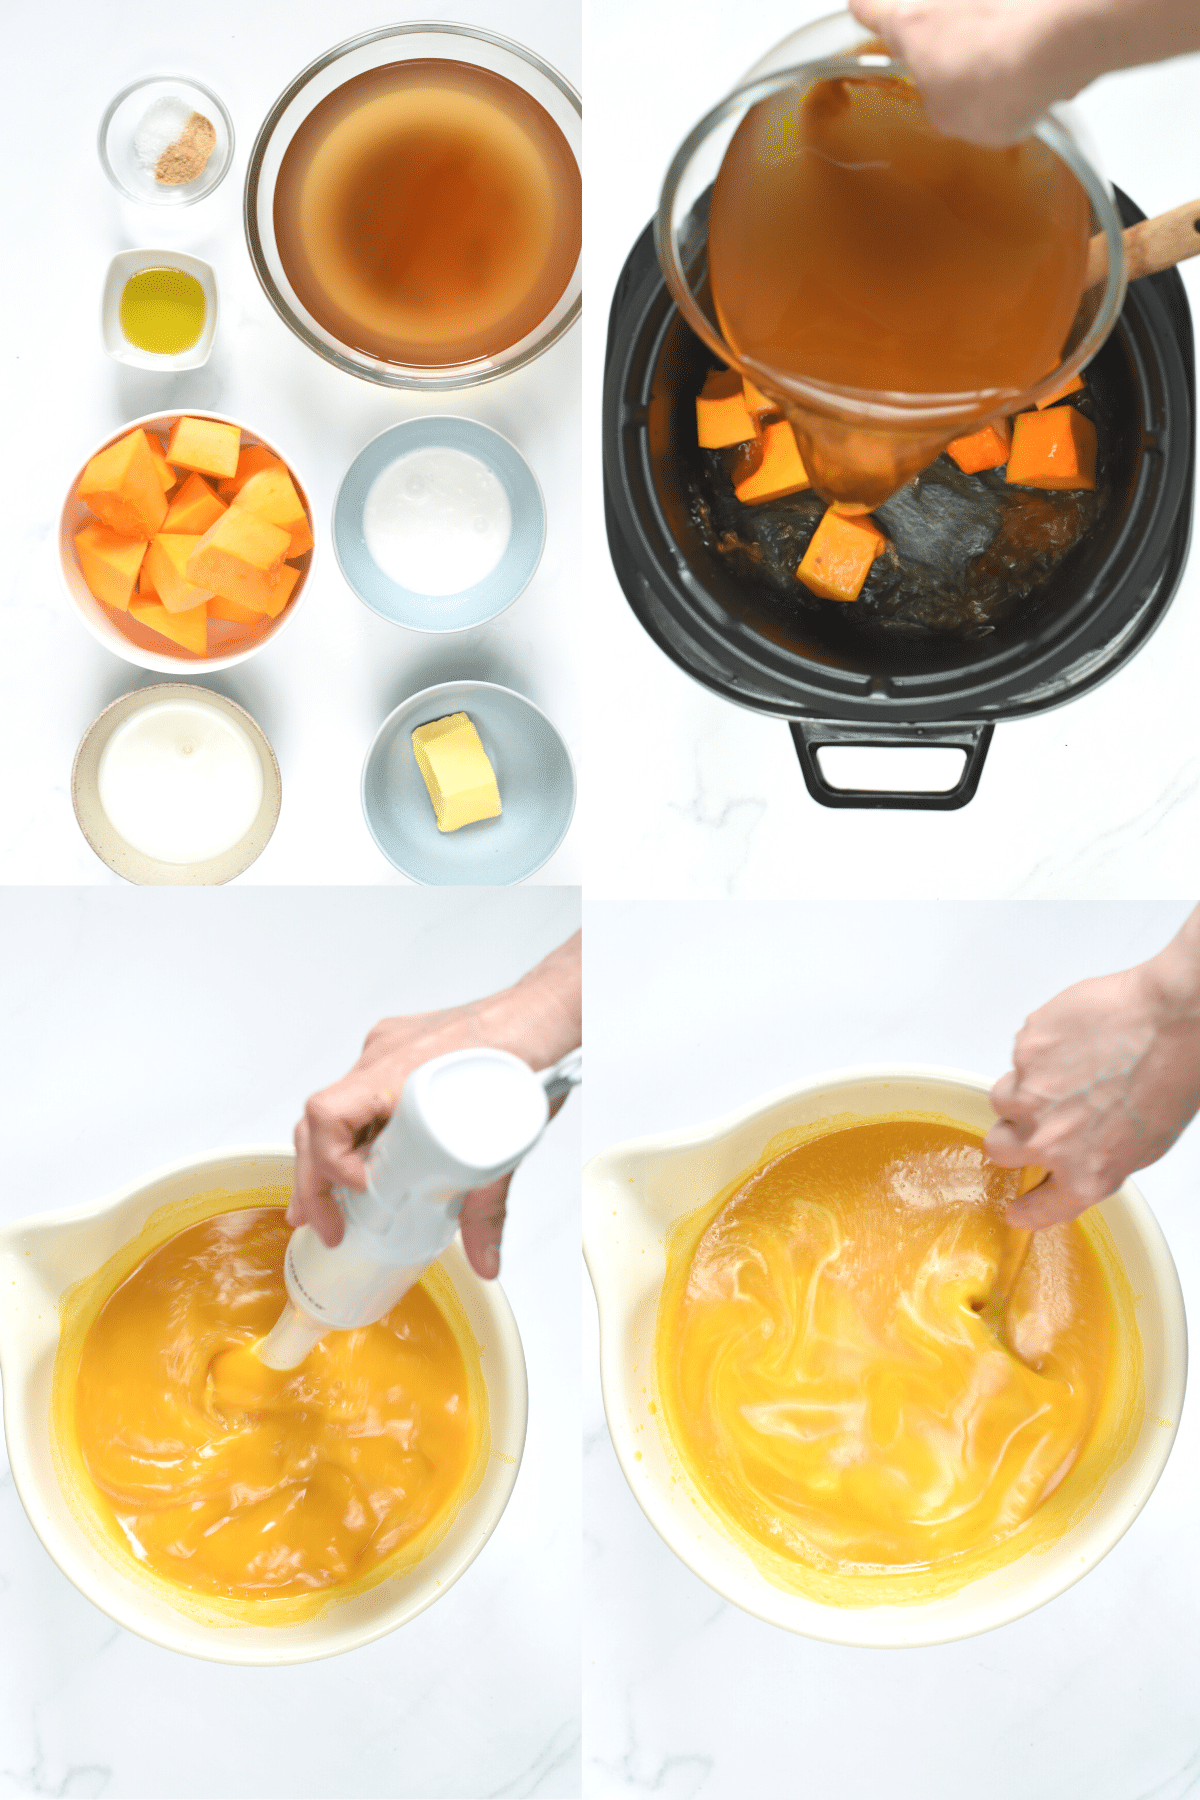 Step-by-step instructions on how to make Keto Pumpkin Soup with an immersion blender.